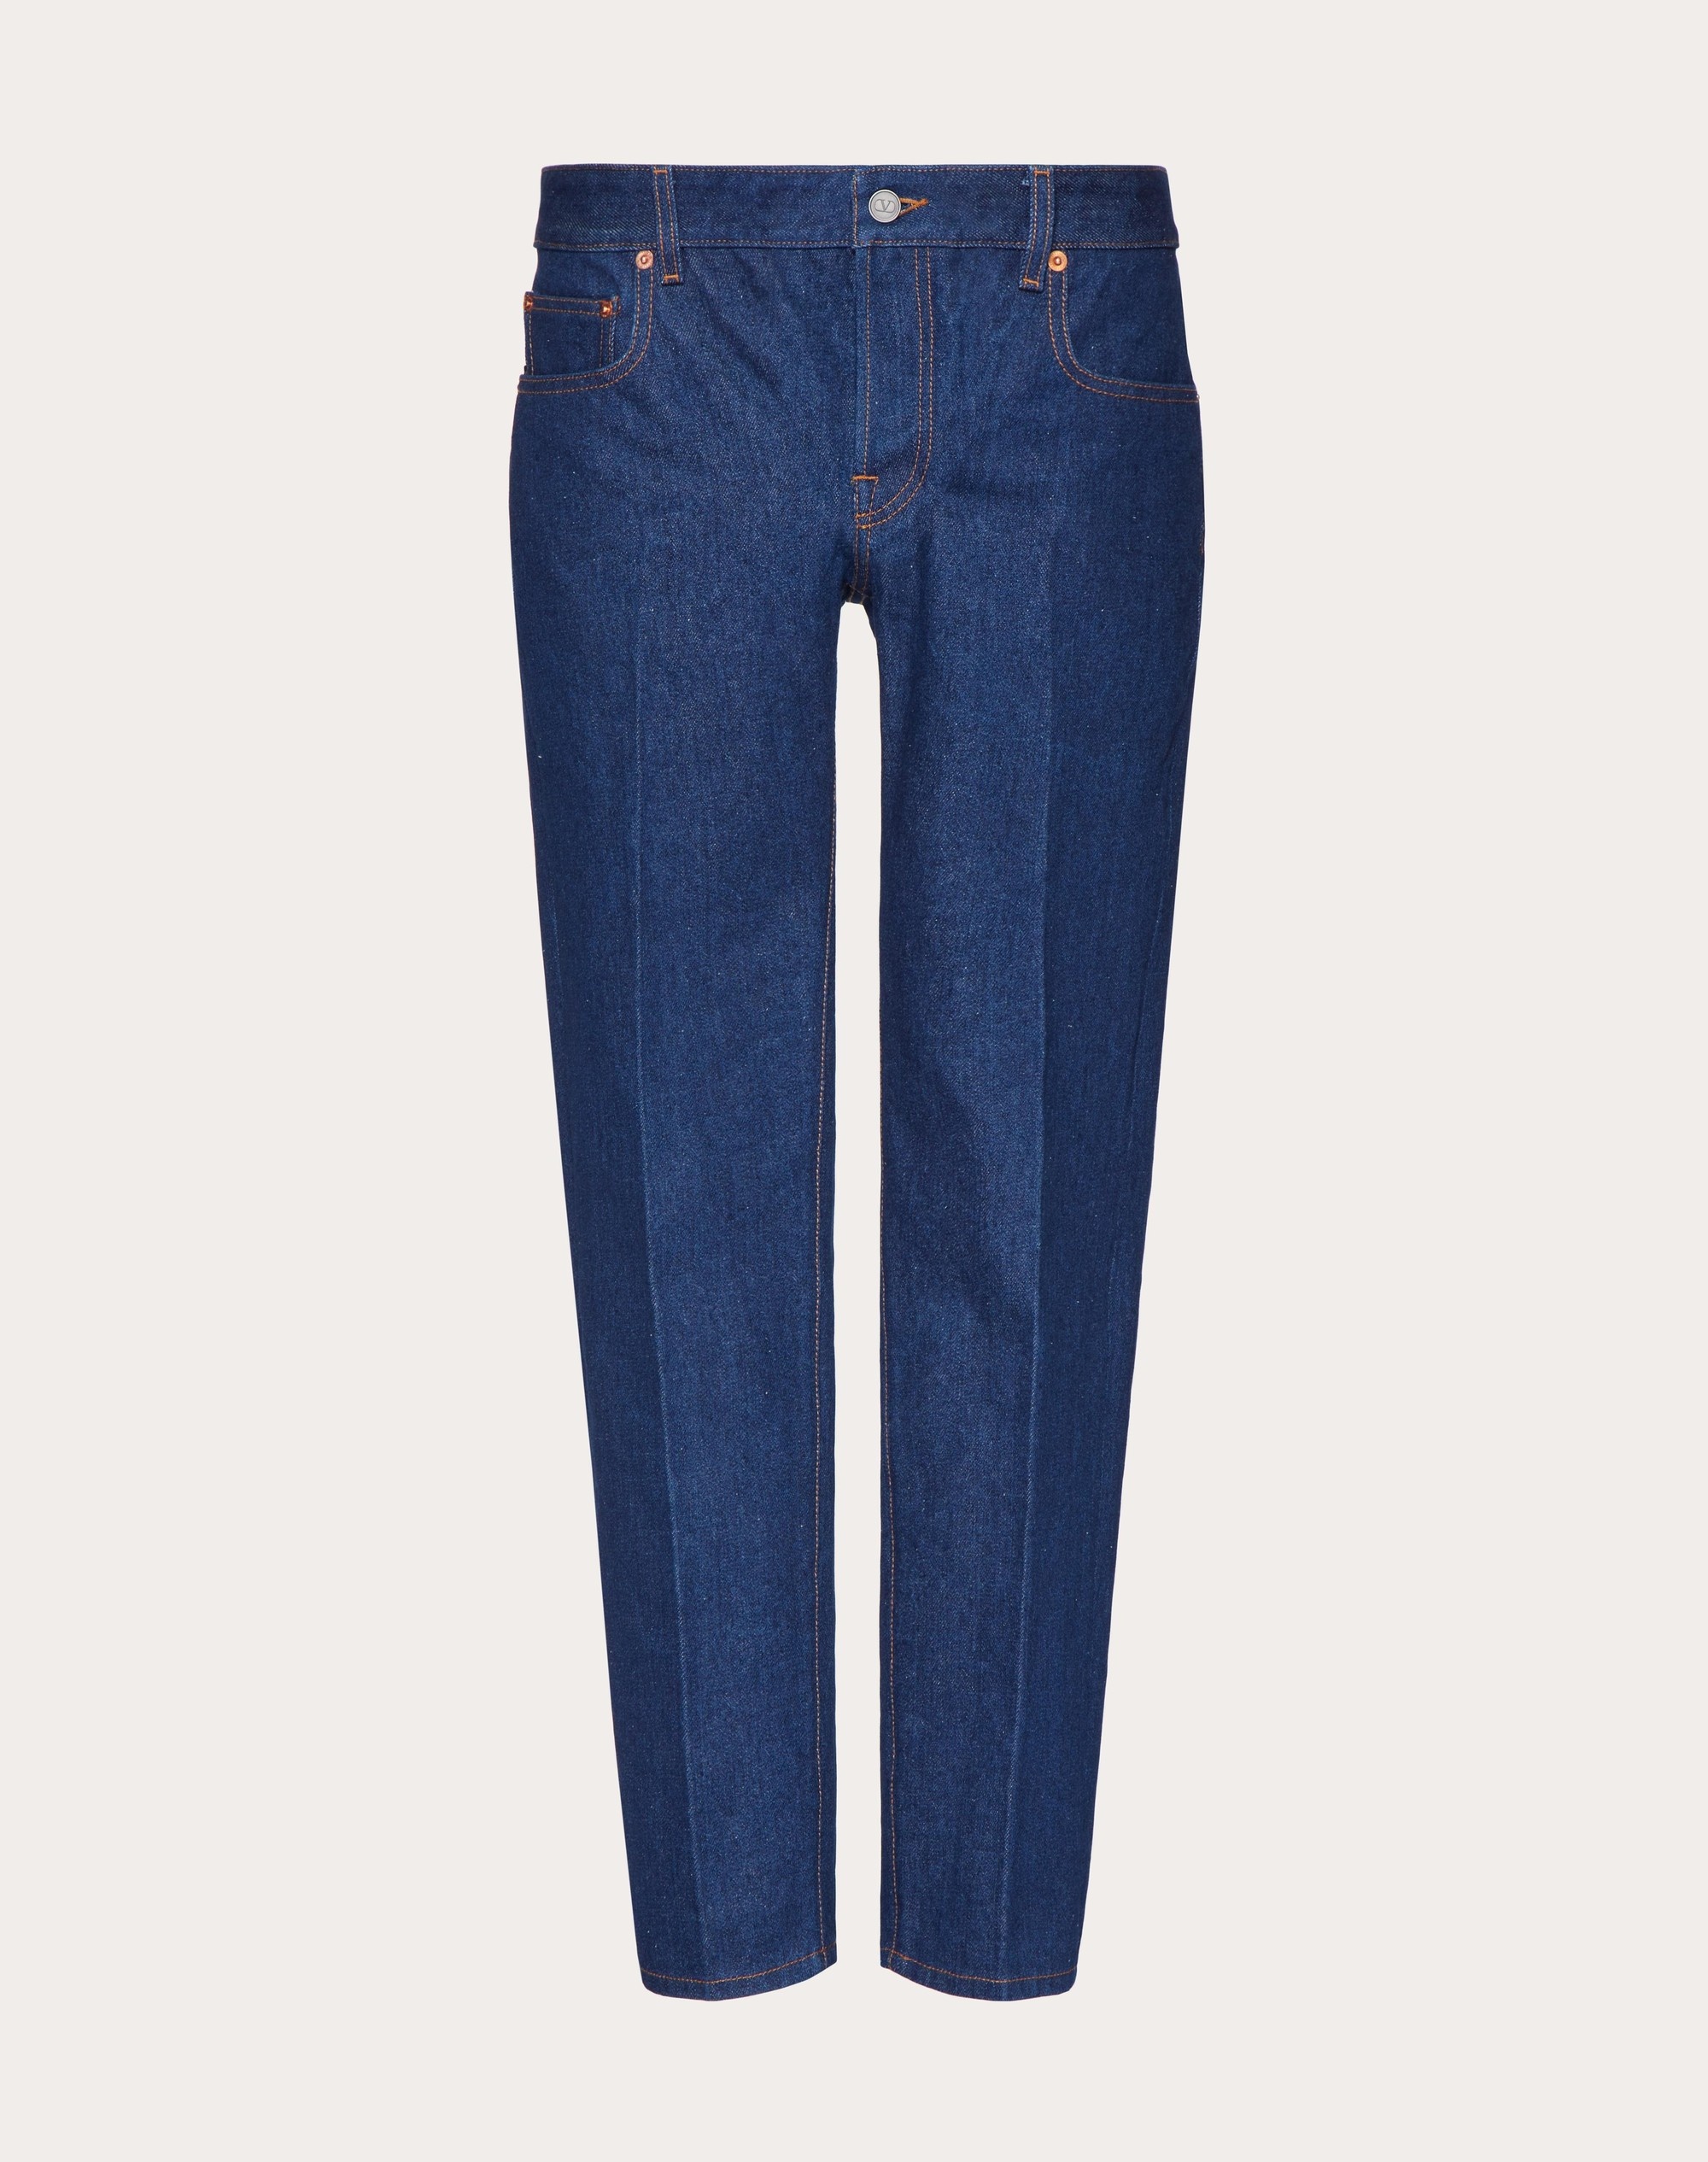 DENIM PANTS WITH MAISON VALENTINO TAILORING LABEL - 1